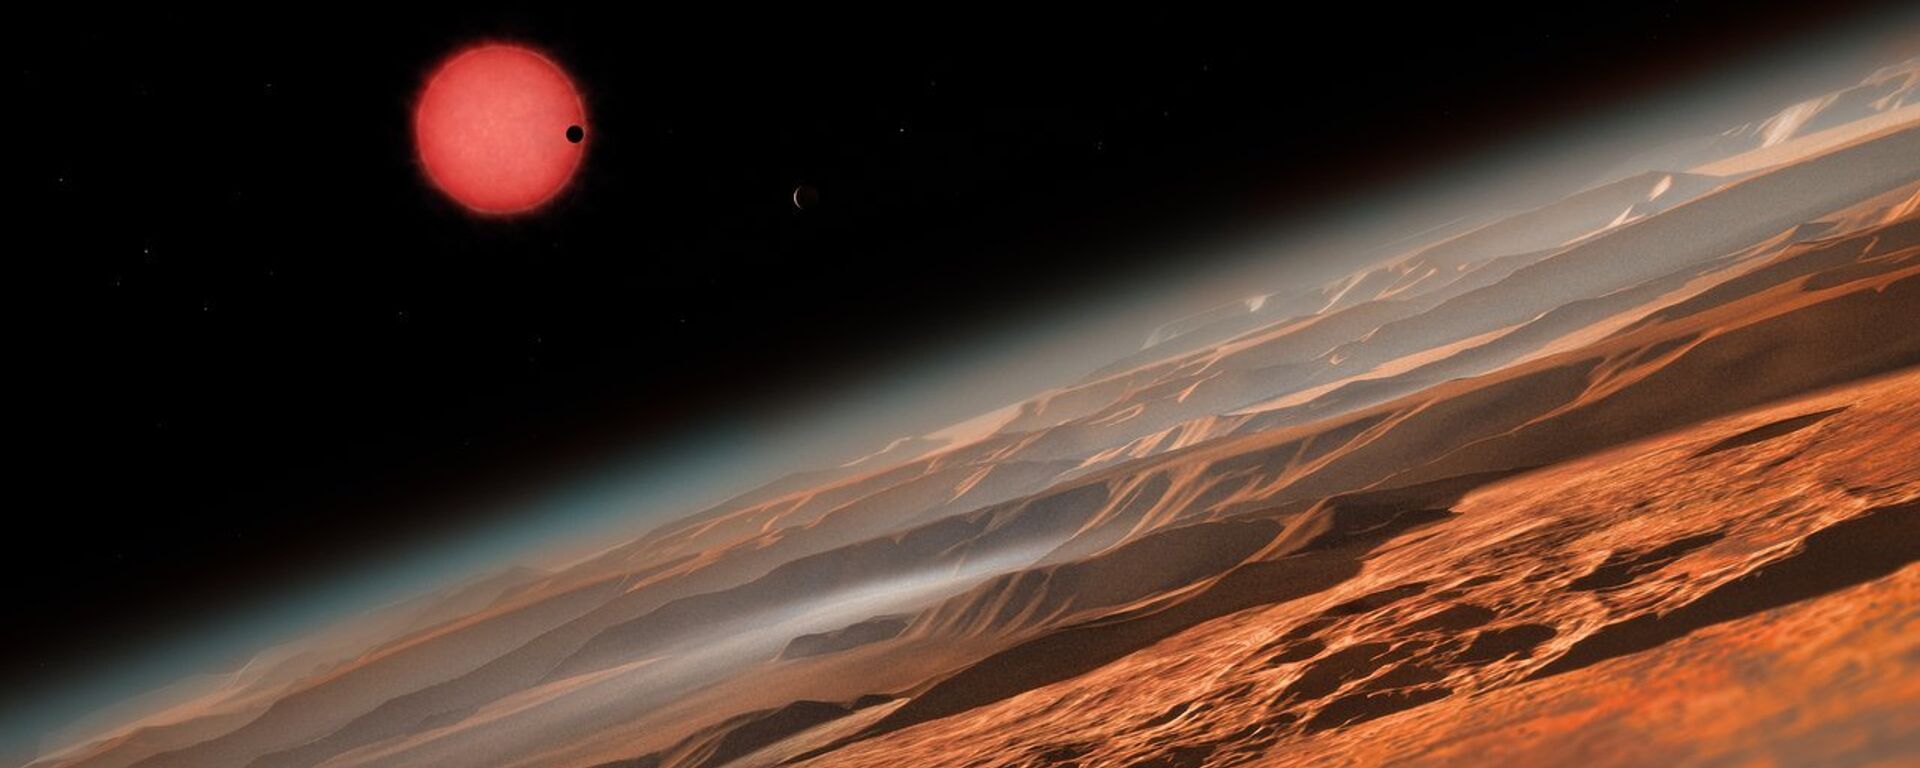 Artist’s impression of the ultracool dwarf star TRAPPIST-1 from close to one of its planets - Sputnik International, 1920, 04.06.2022